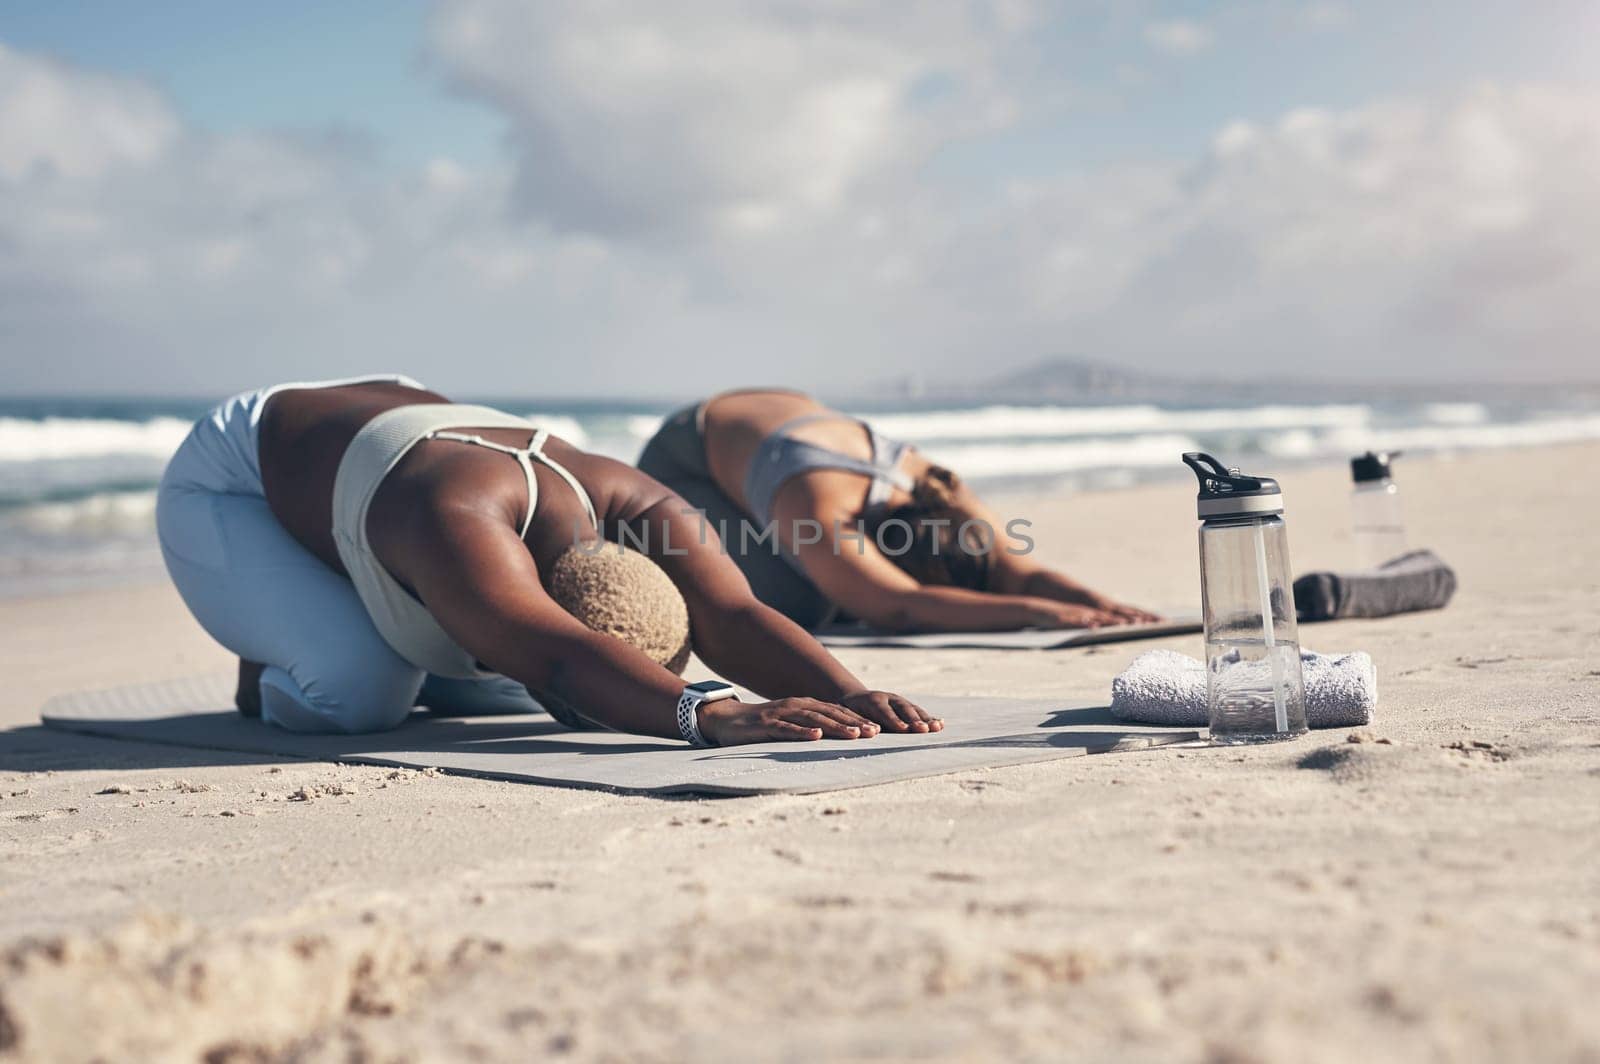 Yoga is like a massage, it relaxes the whole body. two young women practicing yoga on the beach